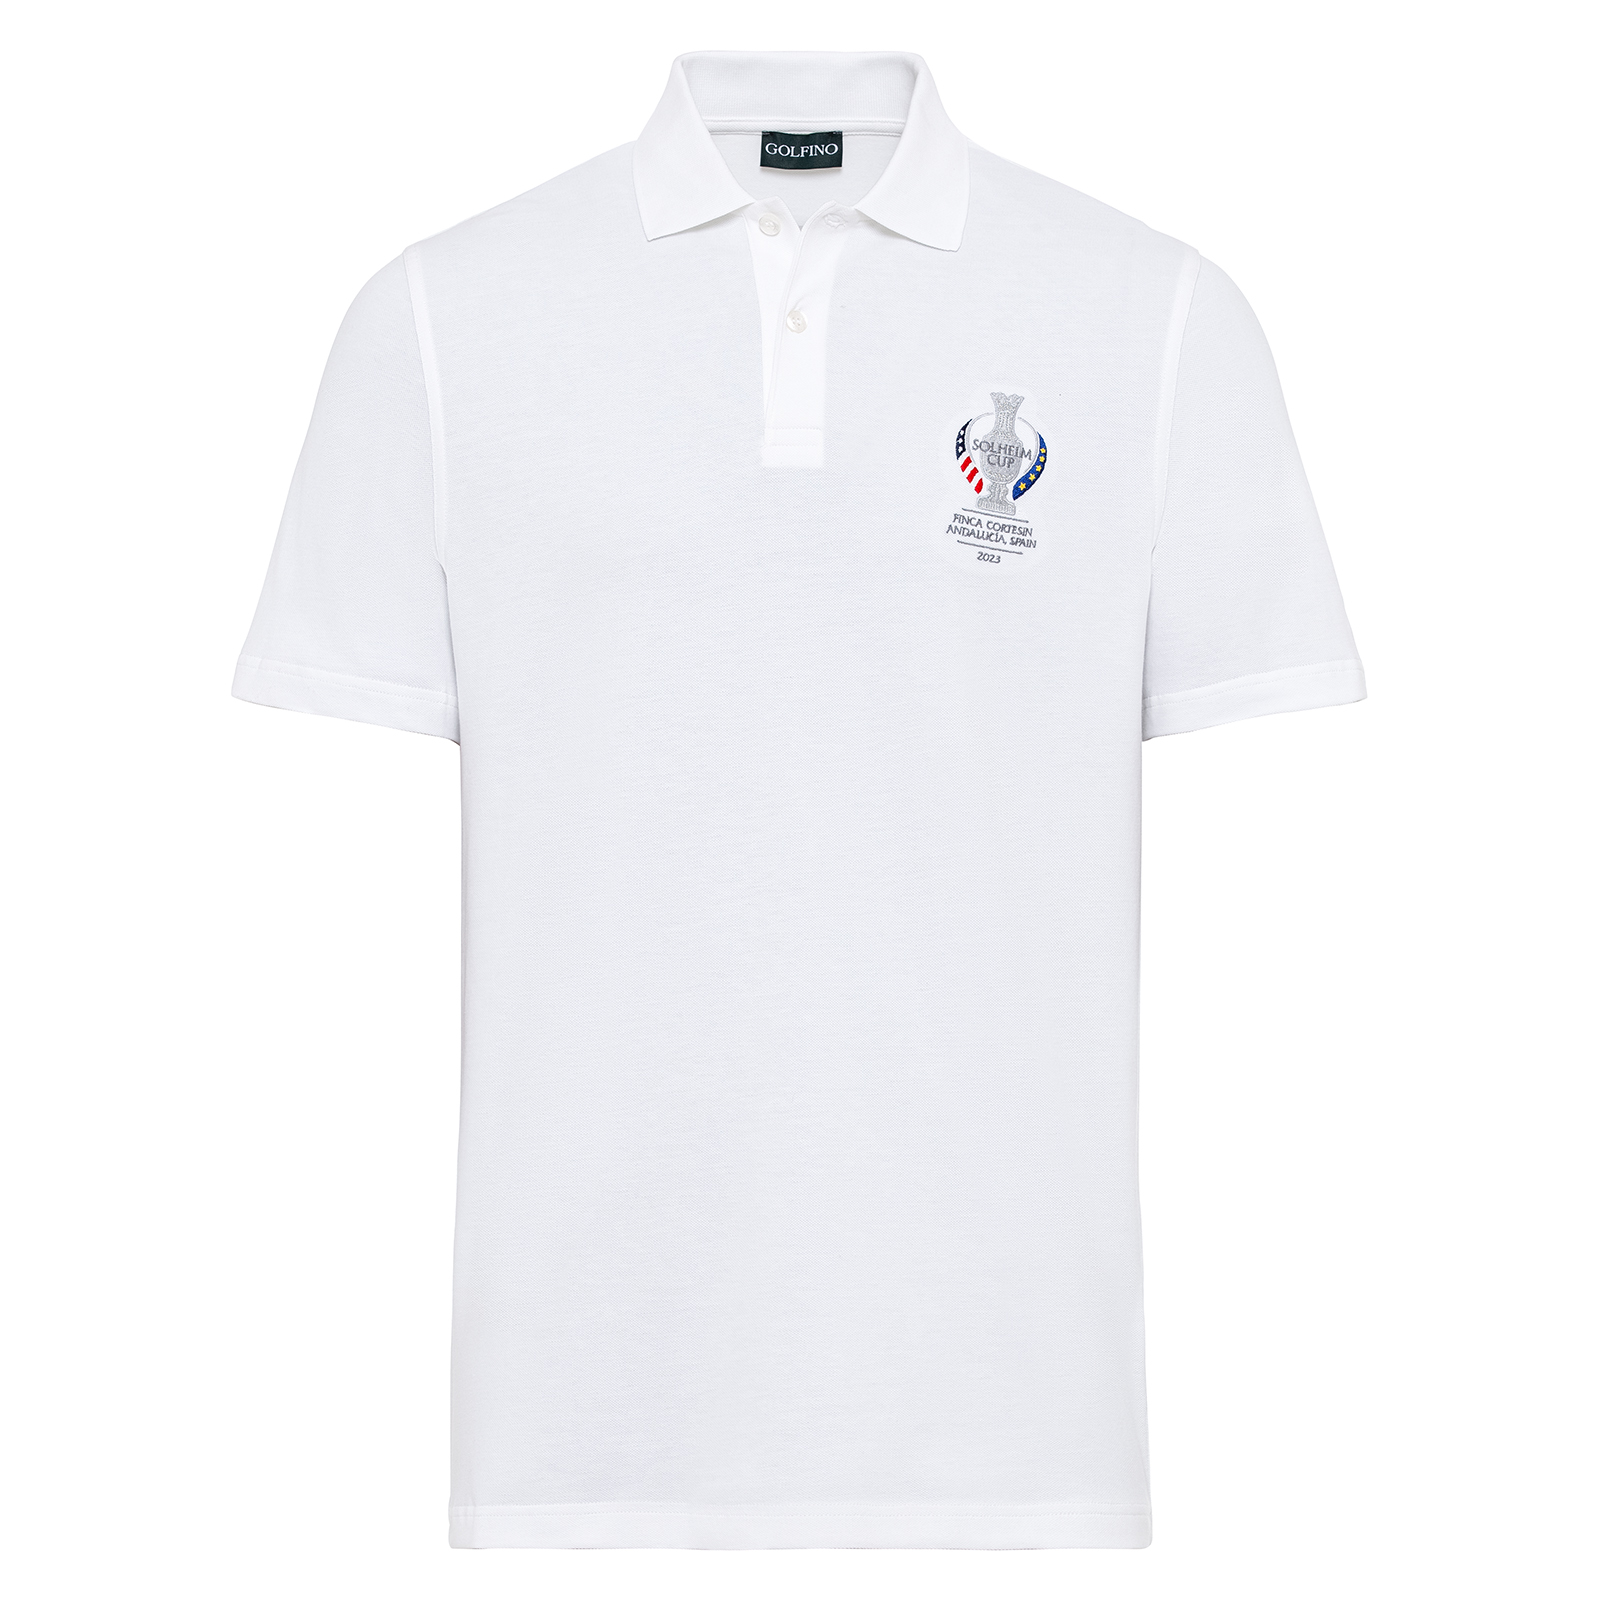 Classic golf polo shirt with sun protection in Solheim Cup design 